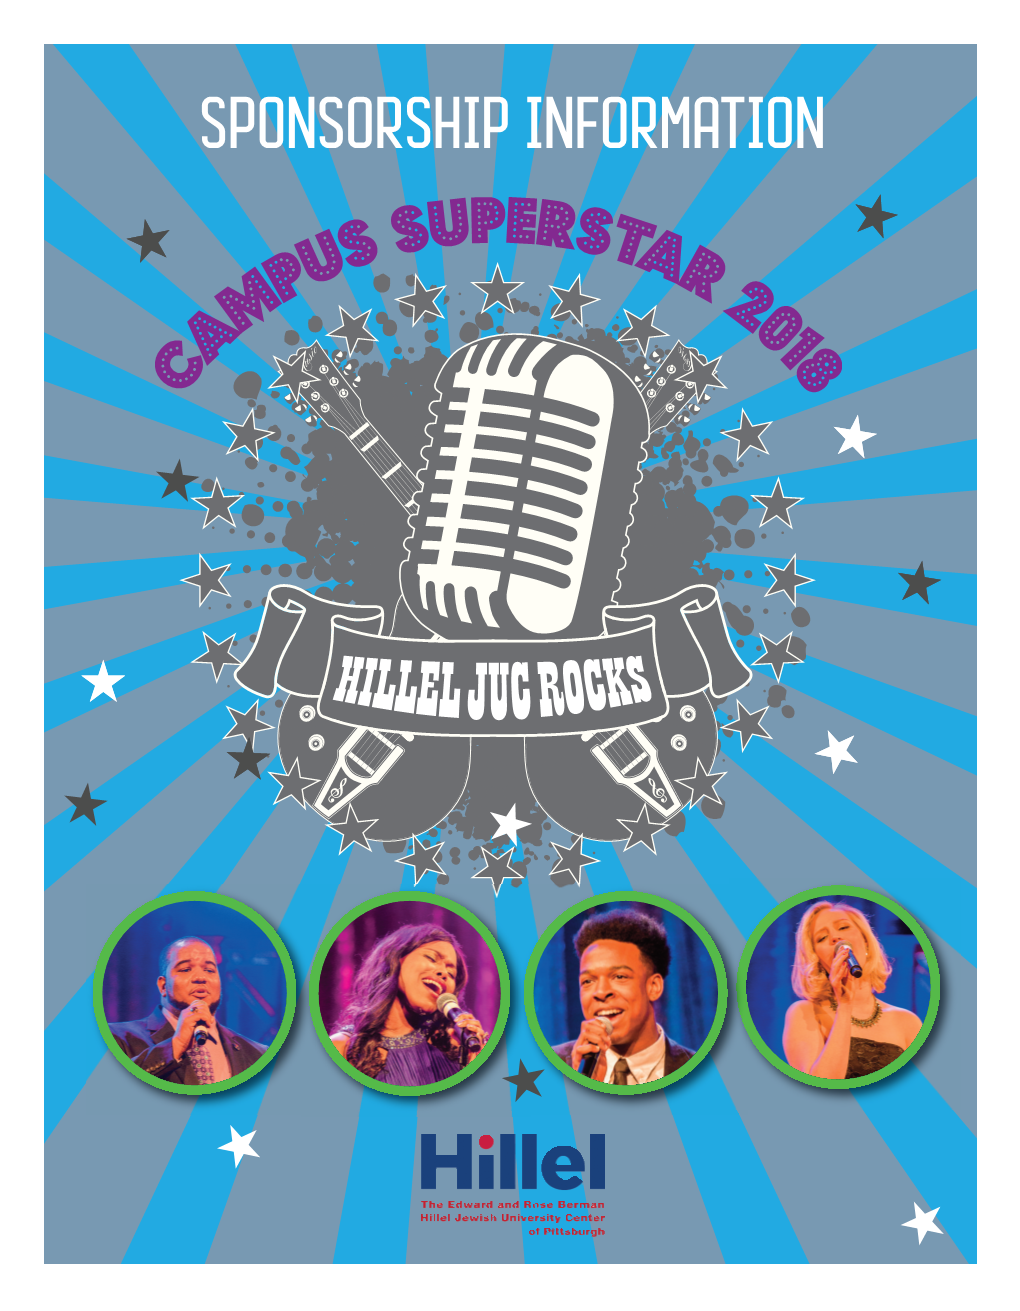 What Is Campus Superstar? D • a High-Caliber Solo Singing Competition Featuring Our Region' S Most Talented College Students